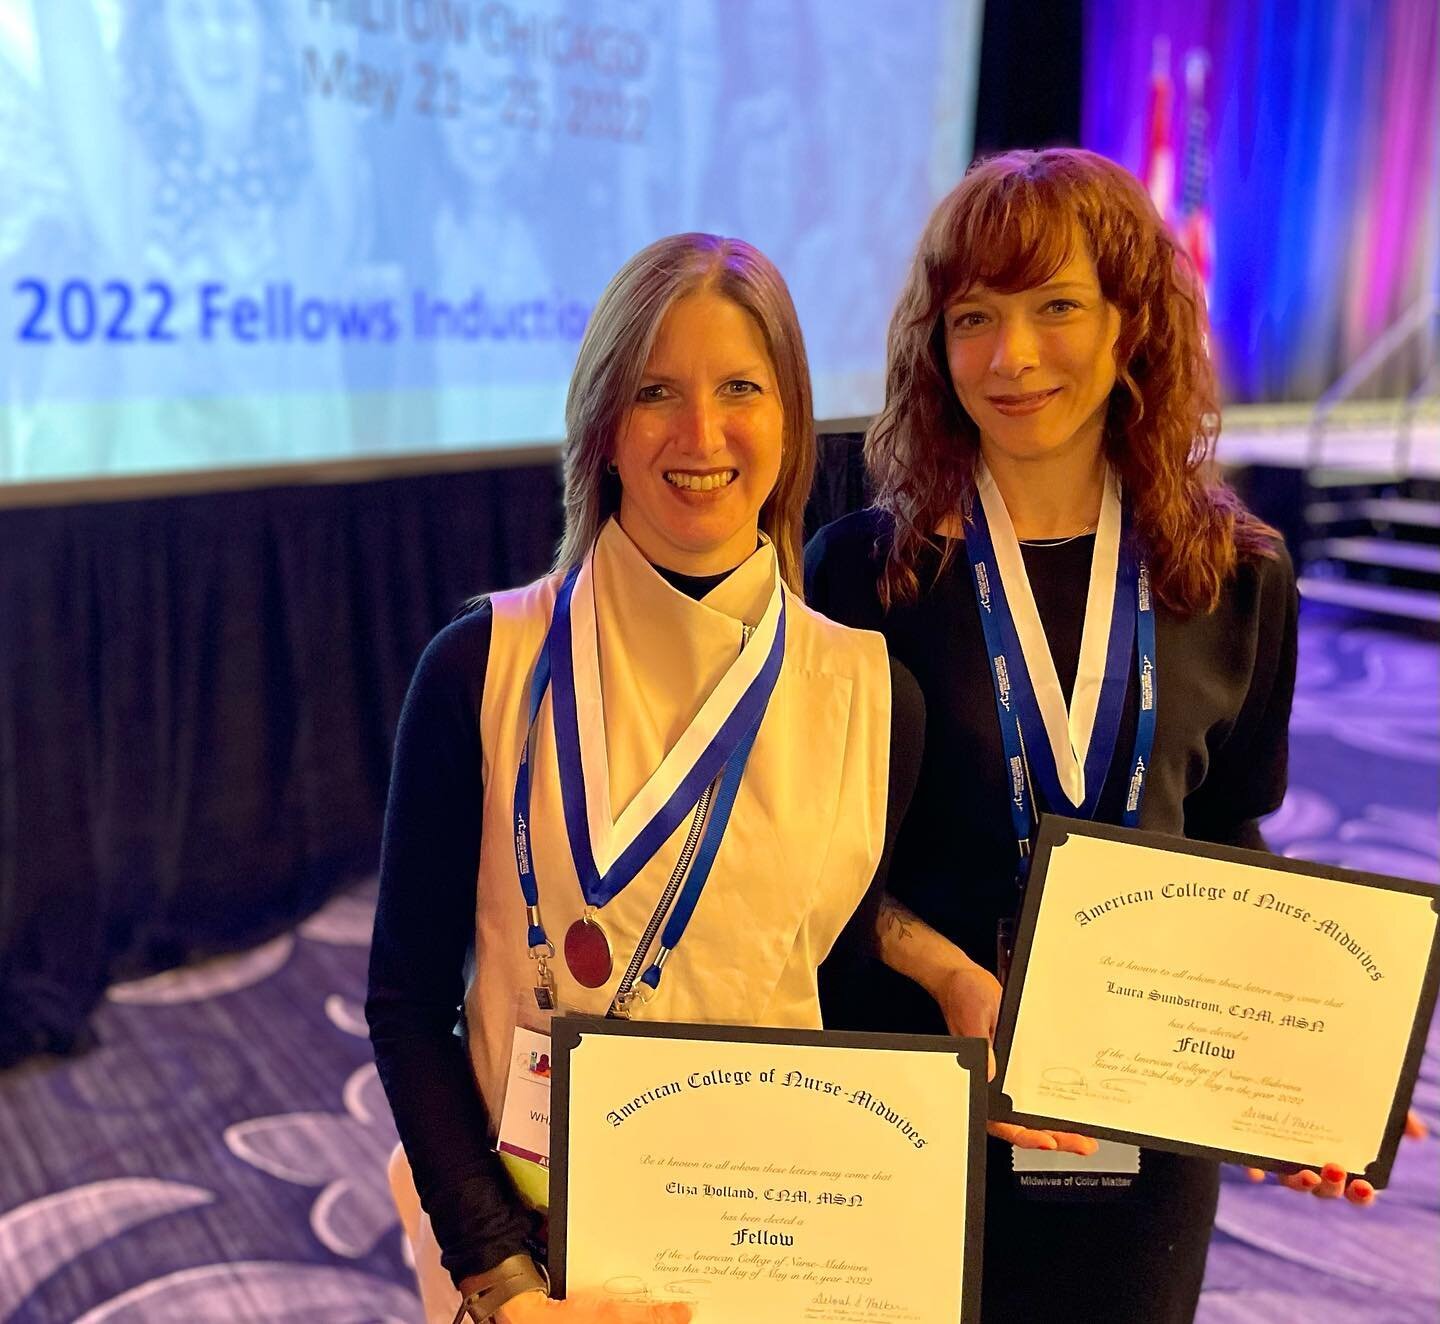 ✨Congratulations✨ to our midwives Eliza Holland and Laura Sundstrom who were inducted as Fellows of the American College of Nurse Midwives (ACNM) last month!

ACNM Fellowship is an honor given to midwives who have demonstrated leadership, scholarship